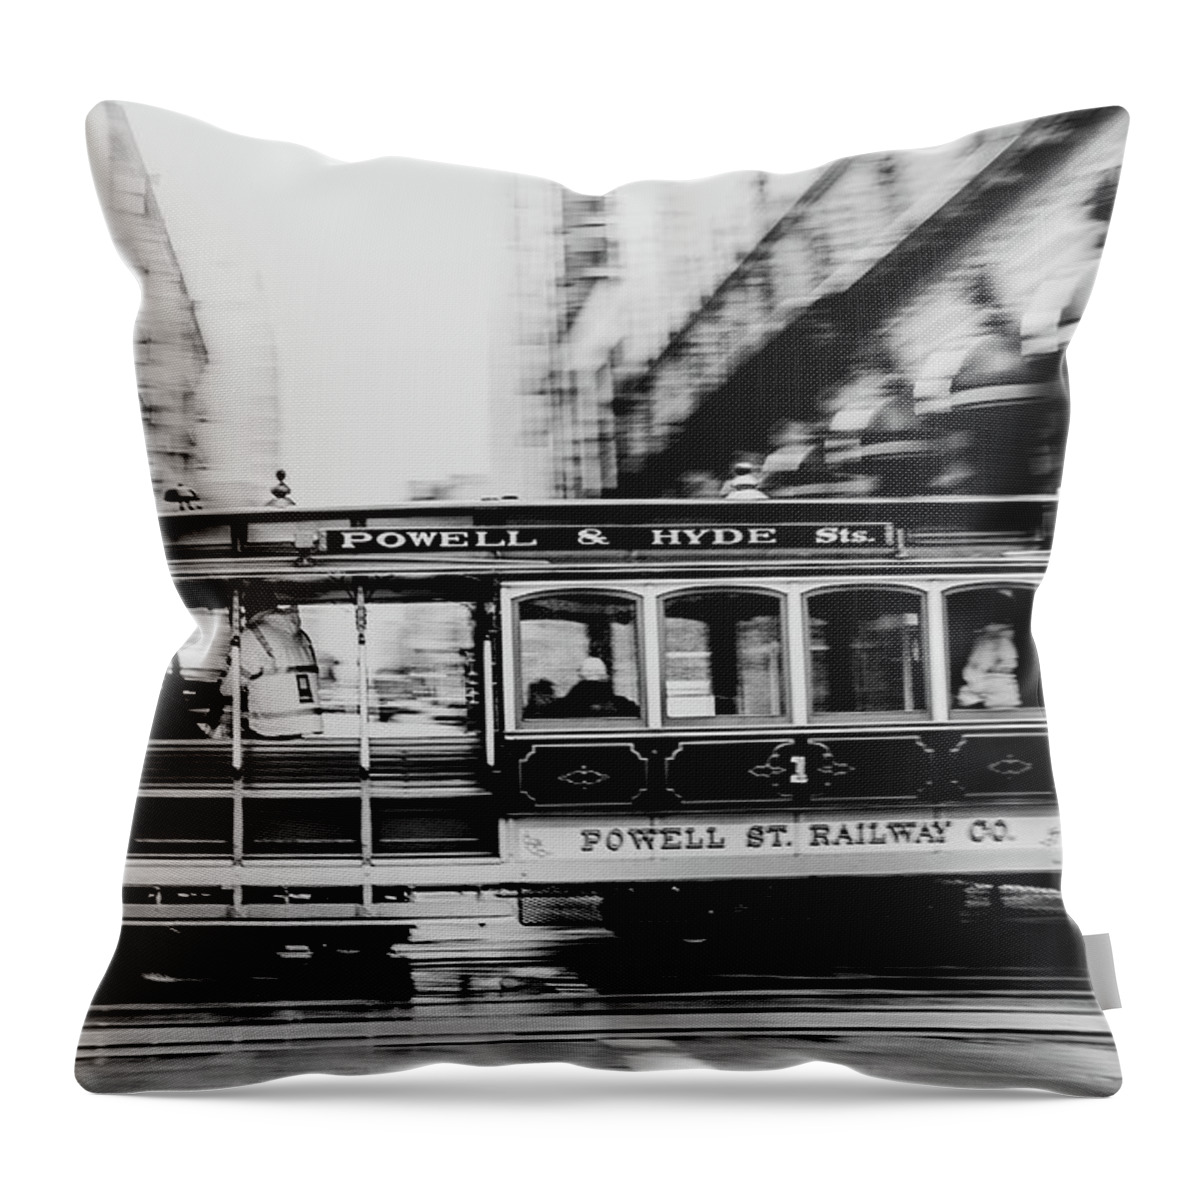 Black And White Throw Pillow featuring the photograph Powell and Hyde Sts by Stephen Holst